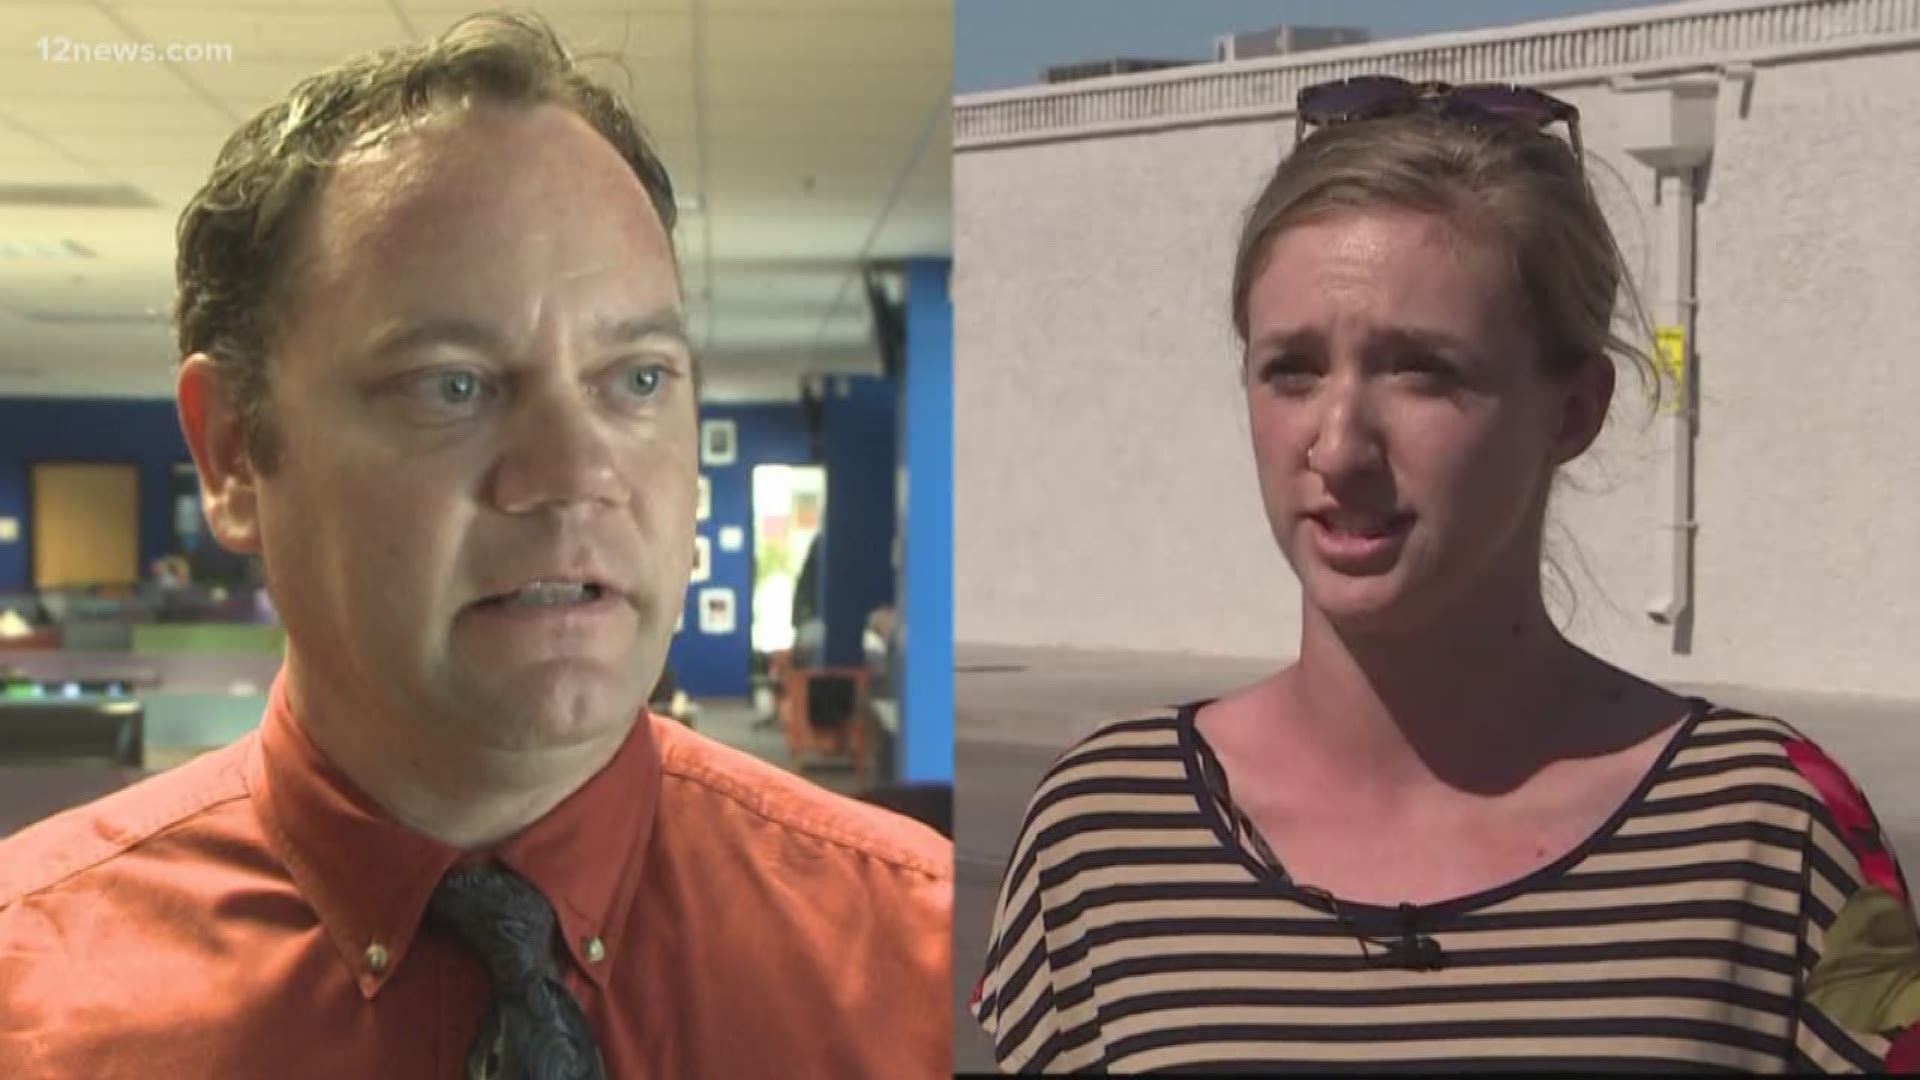 The Arizona School Board Association supports Gov. Ducey's plan to give teachers a 20-percent net raise by 2020, while #RedForEd teachers remain skeptical. Teachers on both sides explained their reasoning to 12 News.